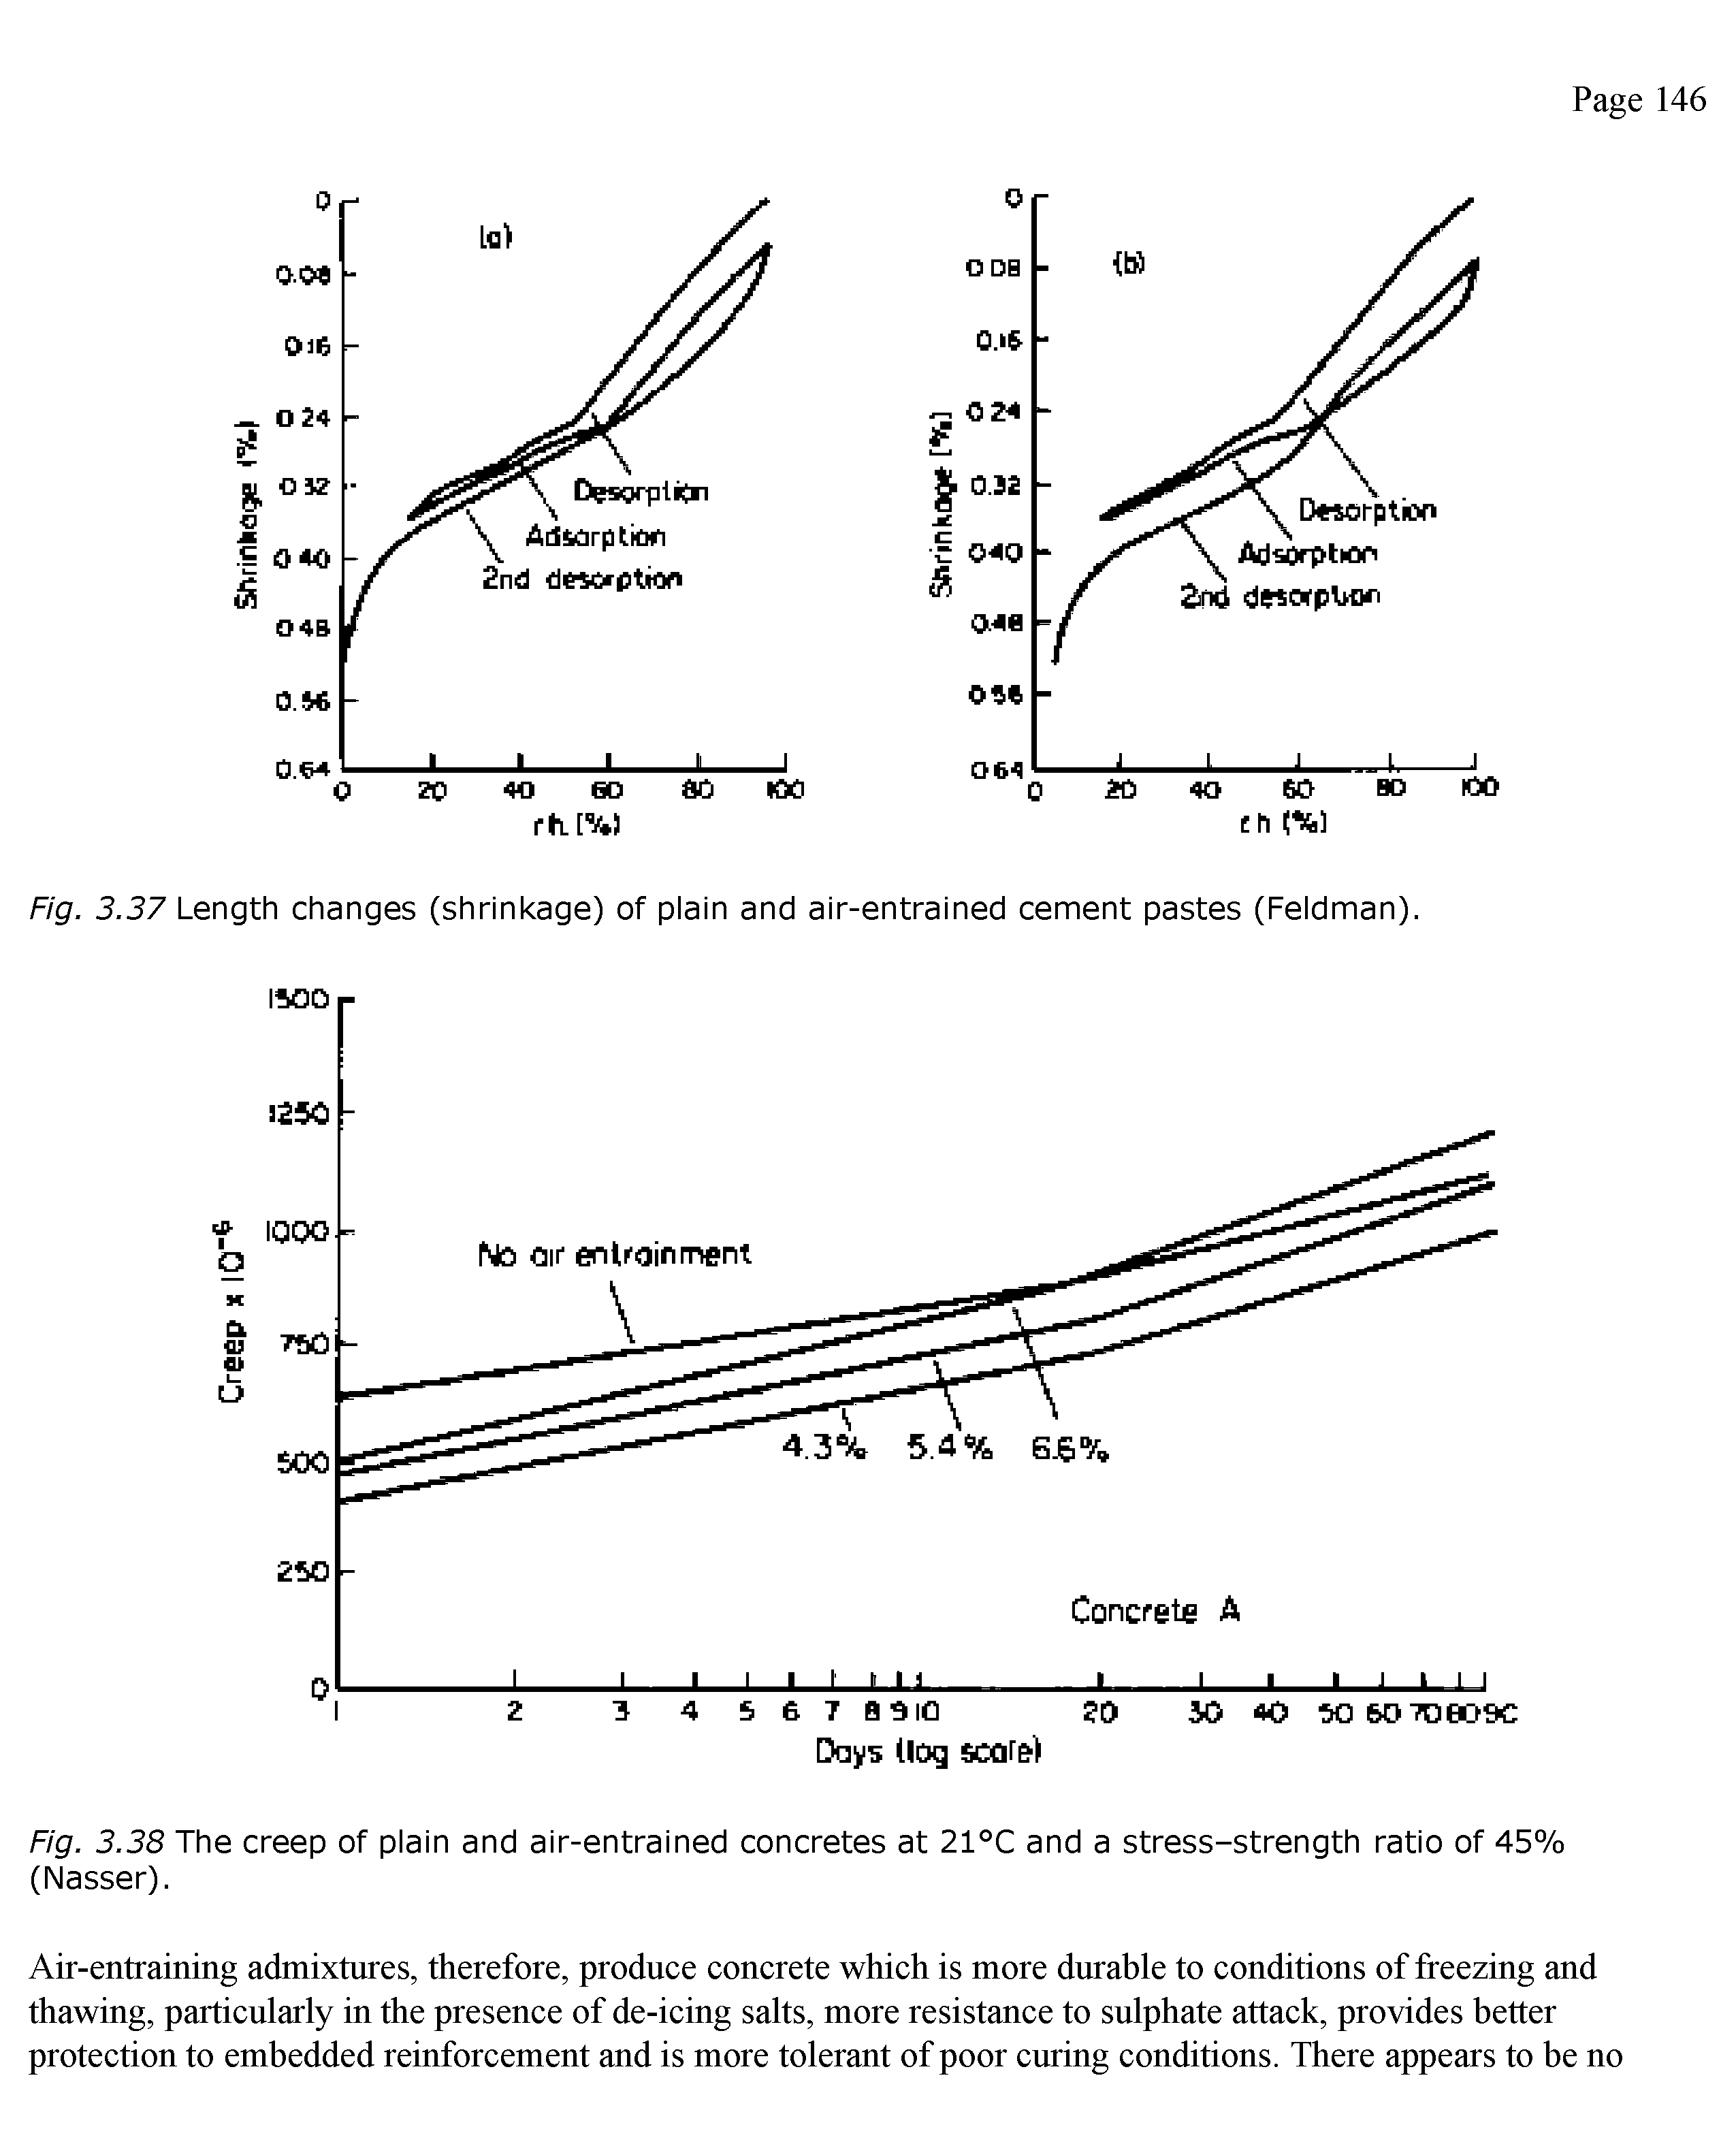 Fig. 3.38 The creep of plain and air-entrained concretes at 21°C and a stress-strength ratio of 45% (Nasser).